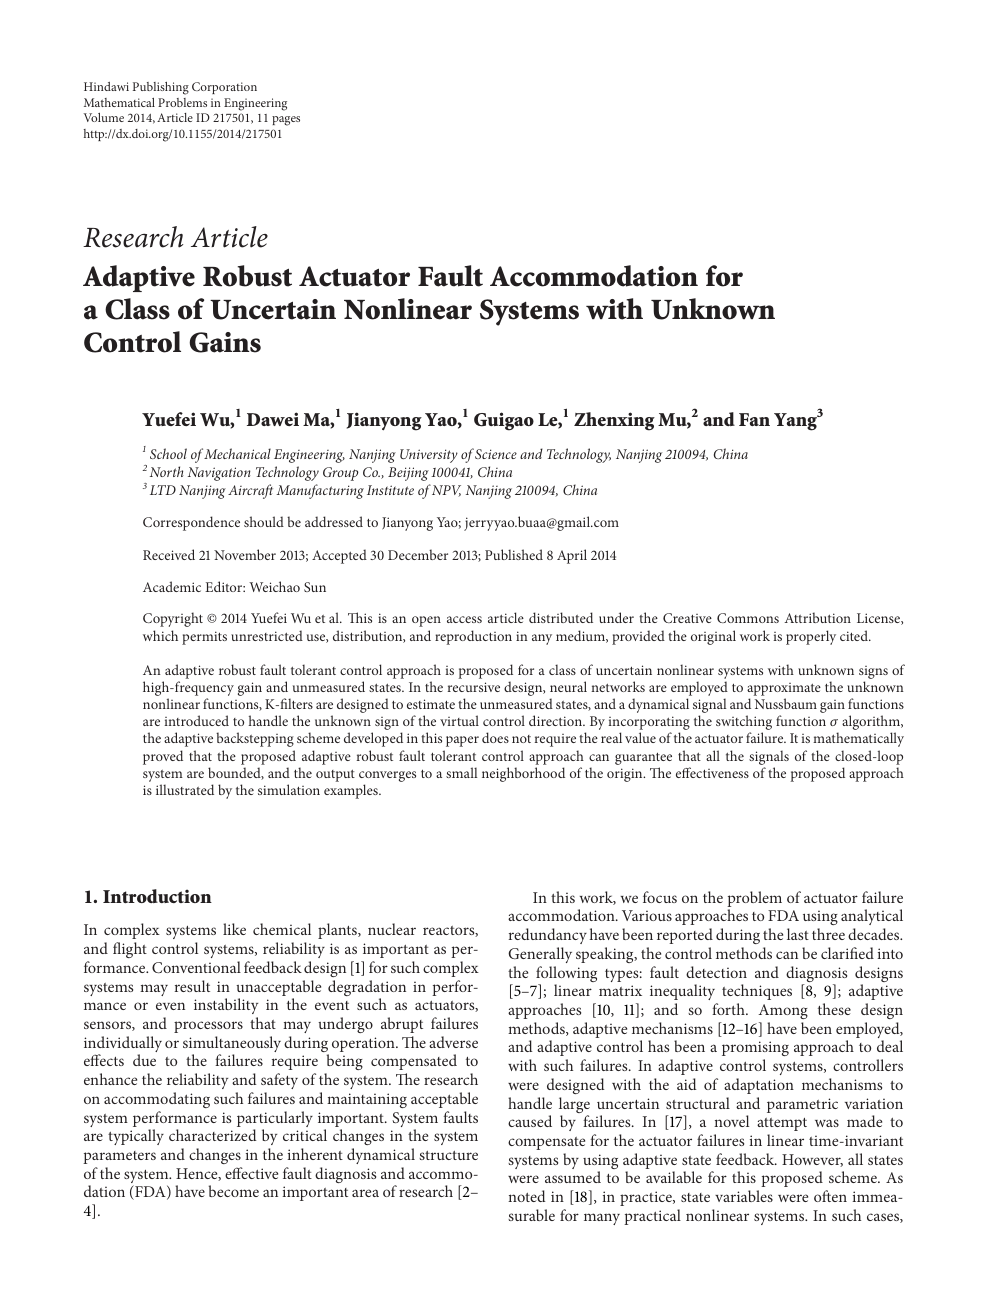 Adaptive Robust Actuator Fault Accommodation For A Class Of Uncertain Nonlinear Systems With Unknown Control Gains Topic Of Research Paper In Mathematics Download Scholarly Article Pdf And Read For Free On